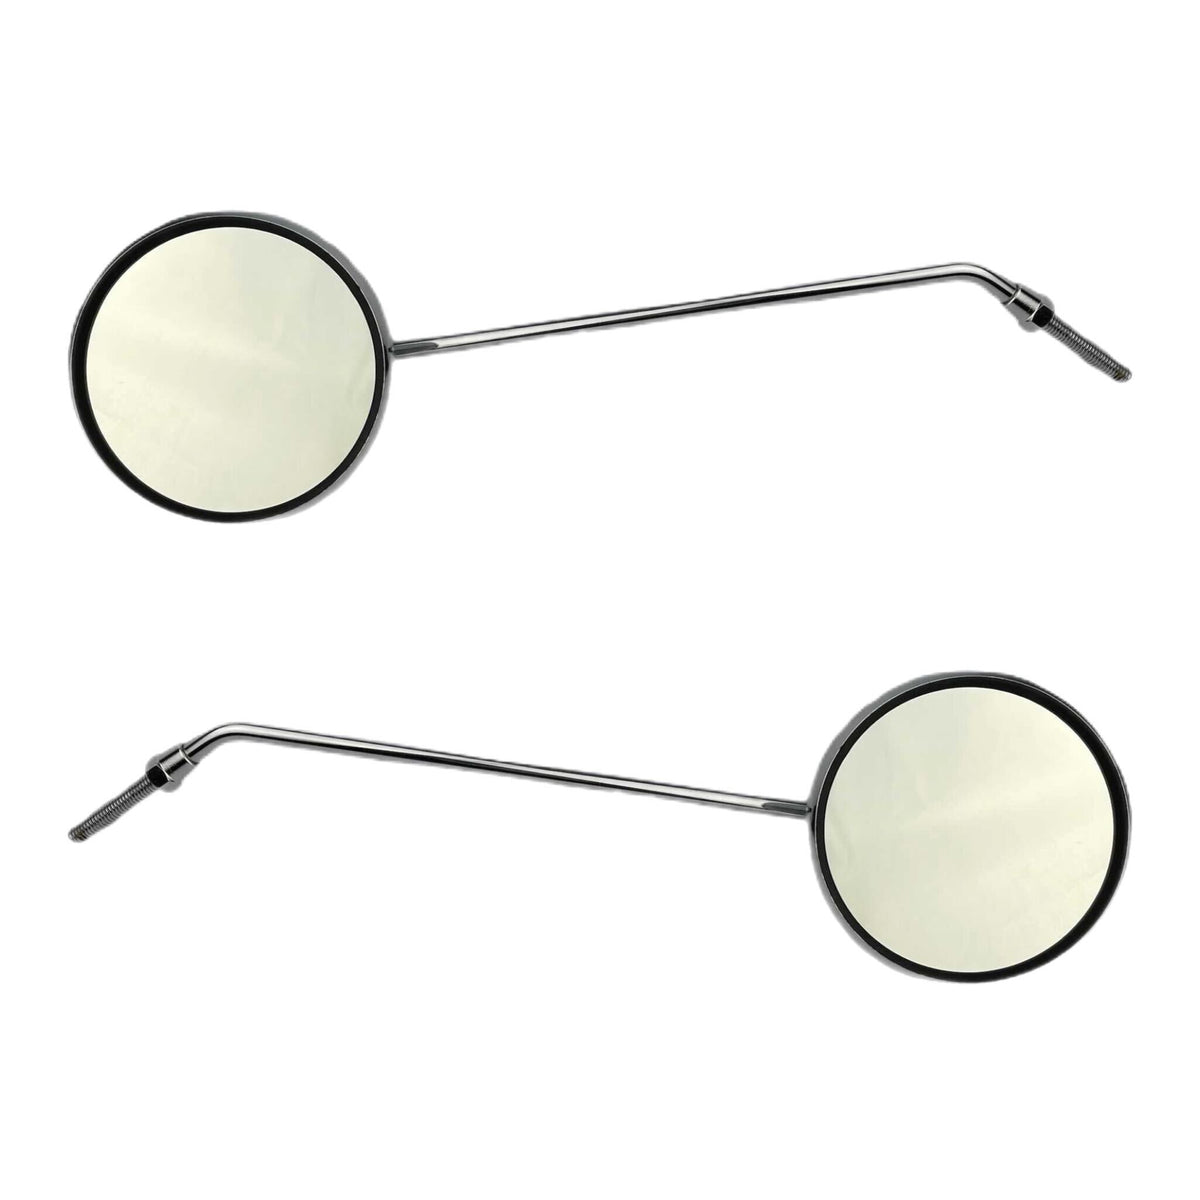 Vespa Adjustable Round Chrome Left or Right Hand Mirrors - Pair - Cuppini